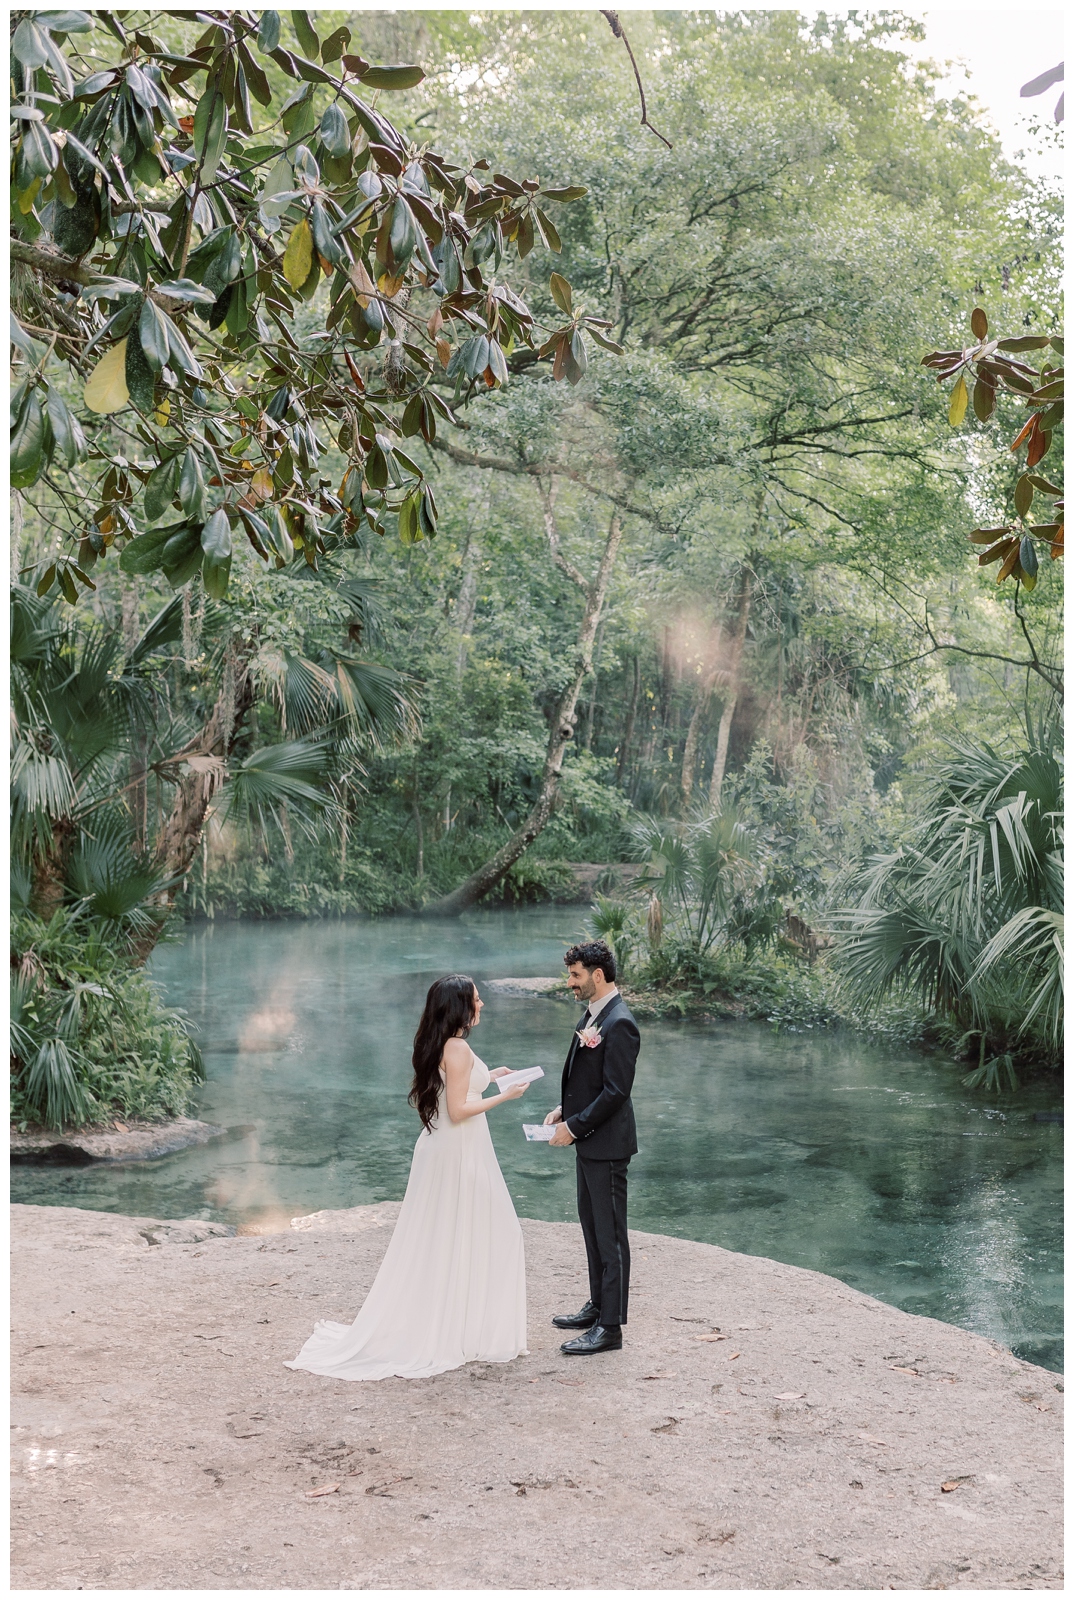 Bride and groom standing on a rock platform exchanging vows at a natural spring during sunrise in Florida.
